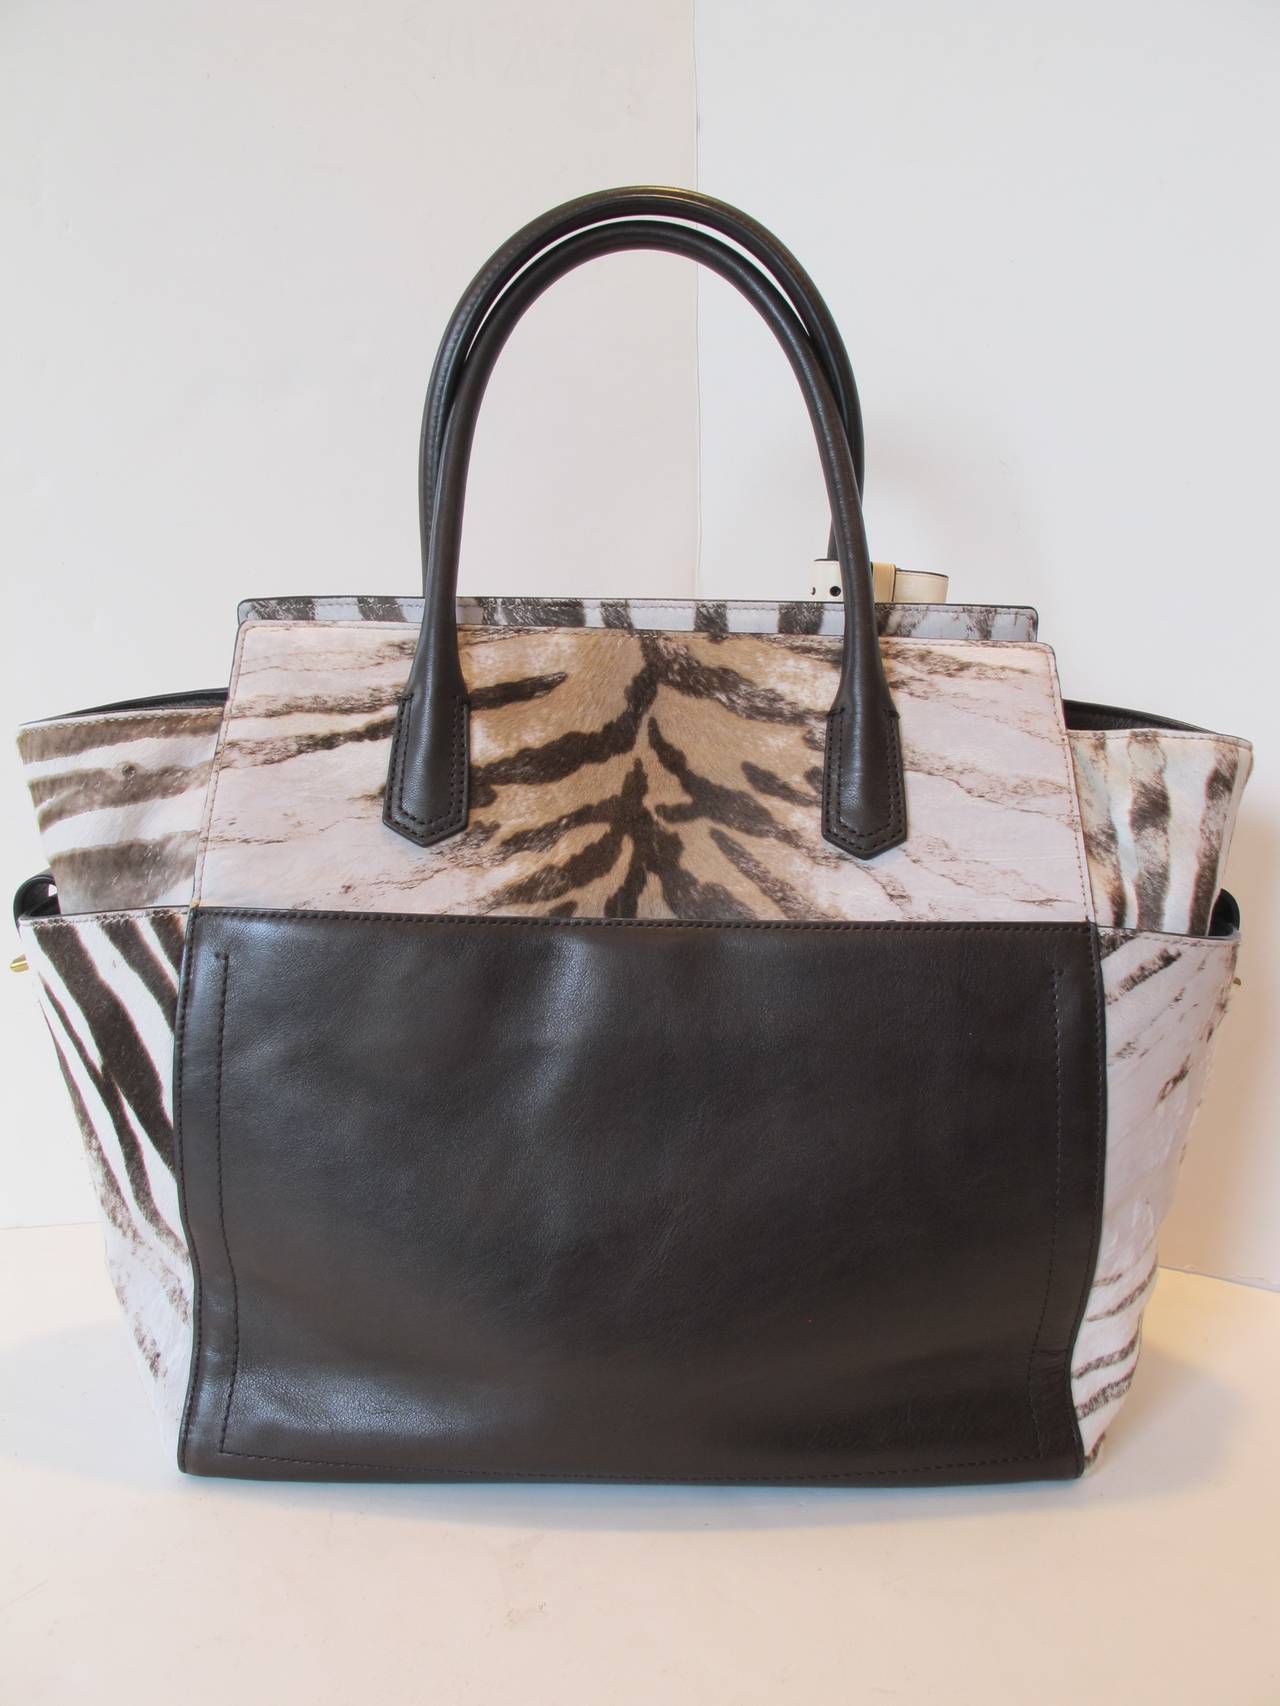 A structural large tote design in luxuriant zebra printed calf hair with leather trim. Dual leather carry handles, 6